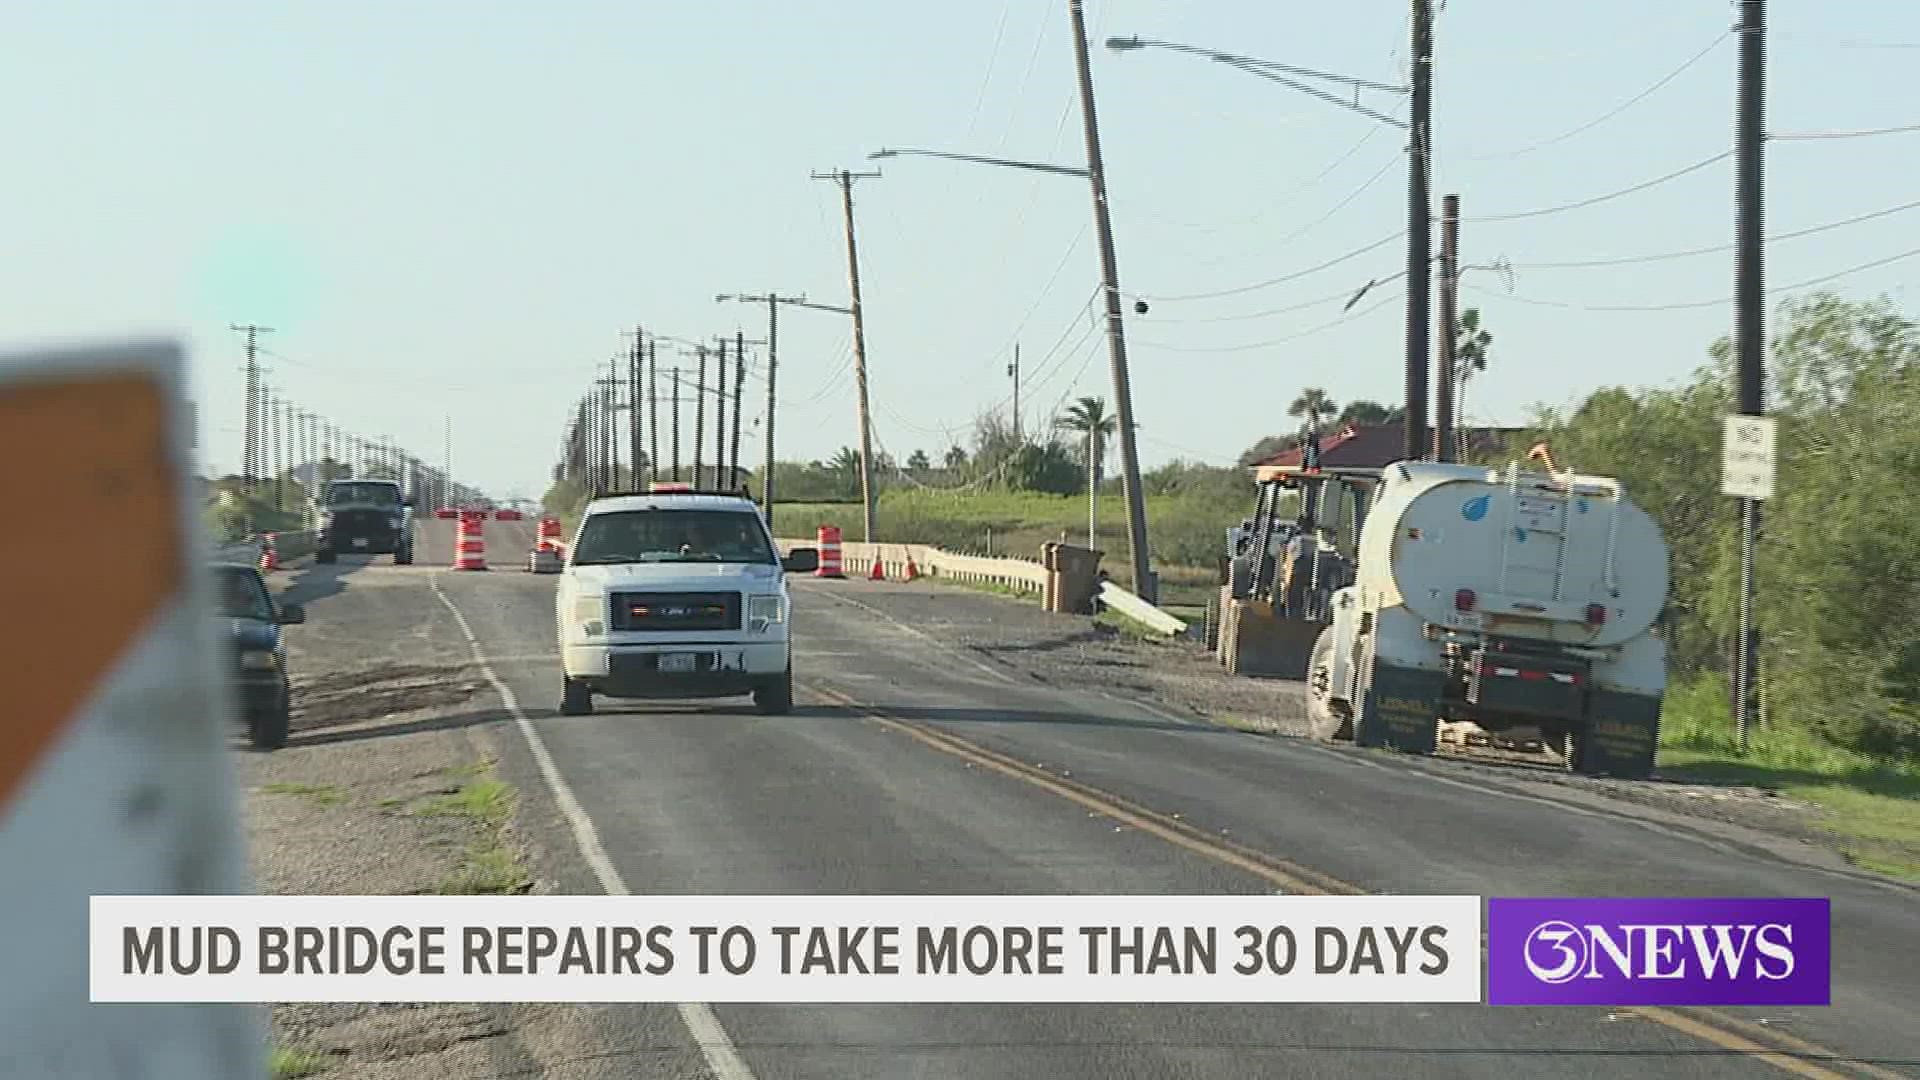 City leaders said years of erosion, neglect have contributed to structural issues with streets, bridges around Corpus Christi, including the mud bridge.